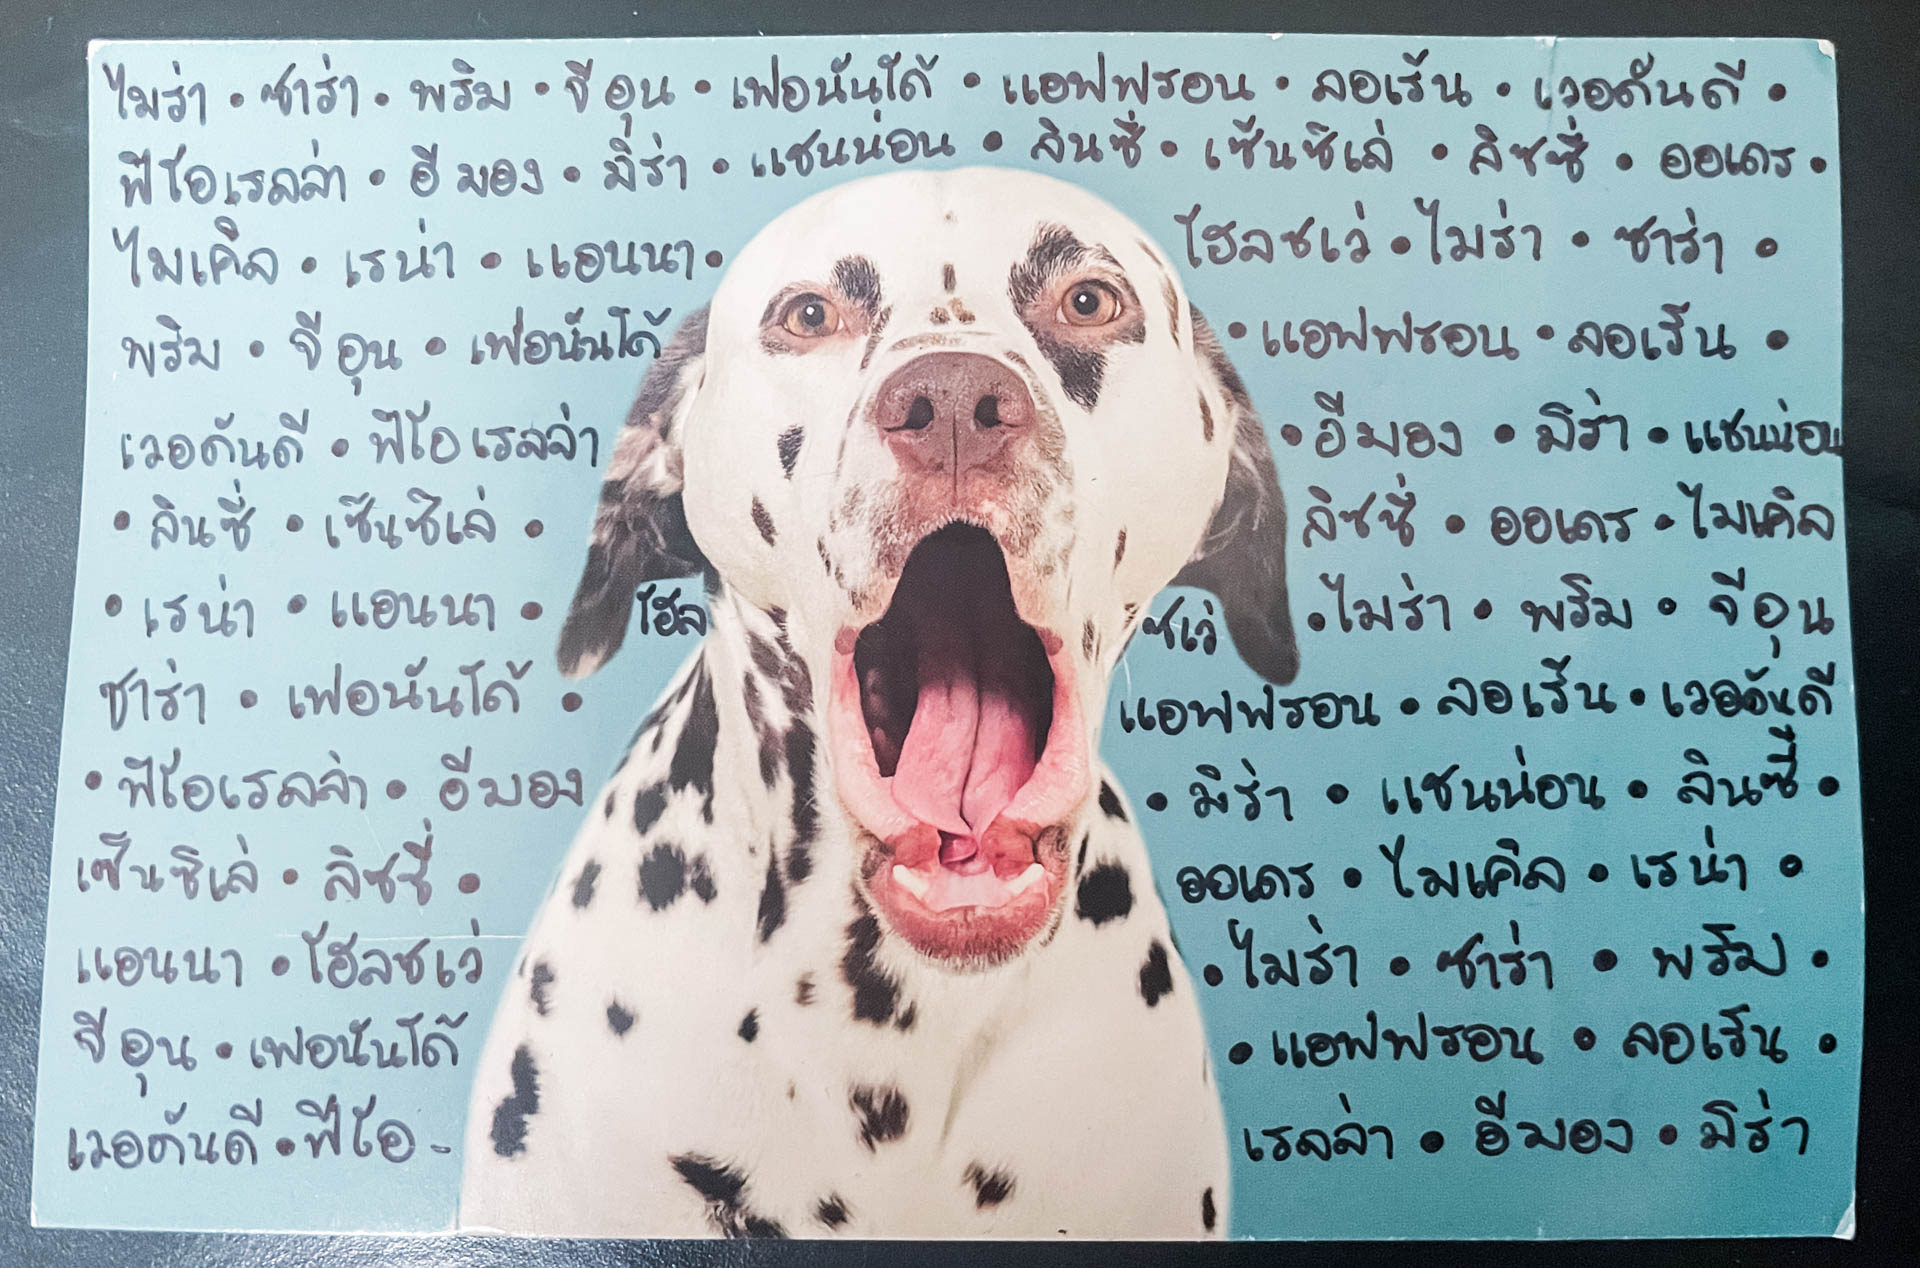 paper with script and photo of dalmation dog